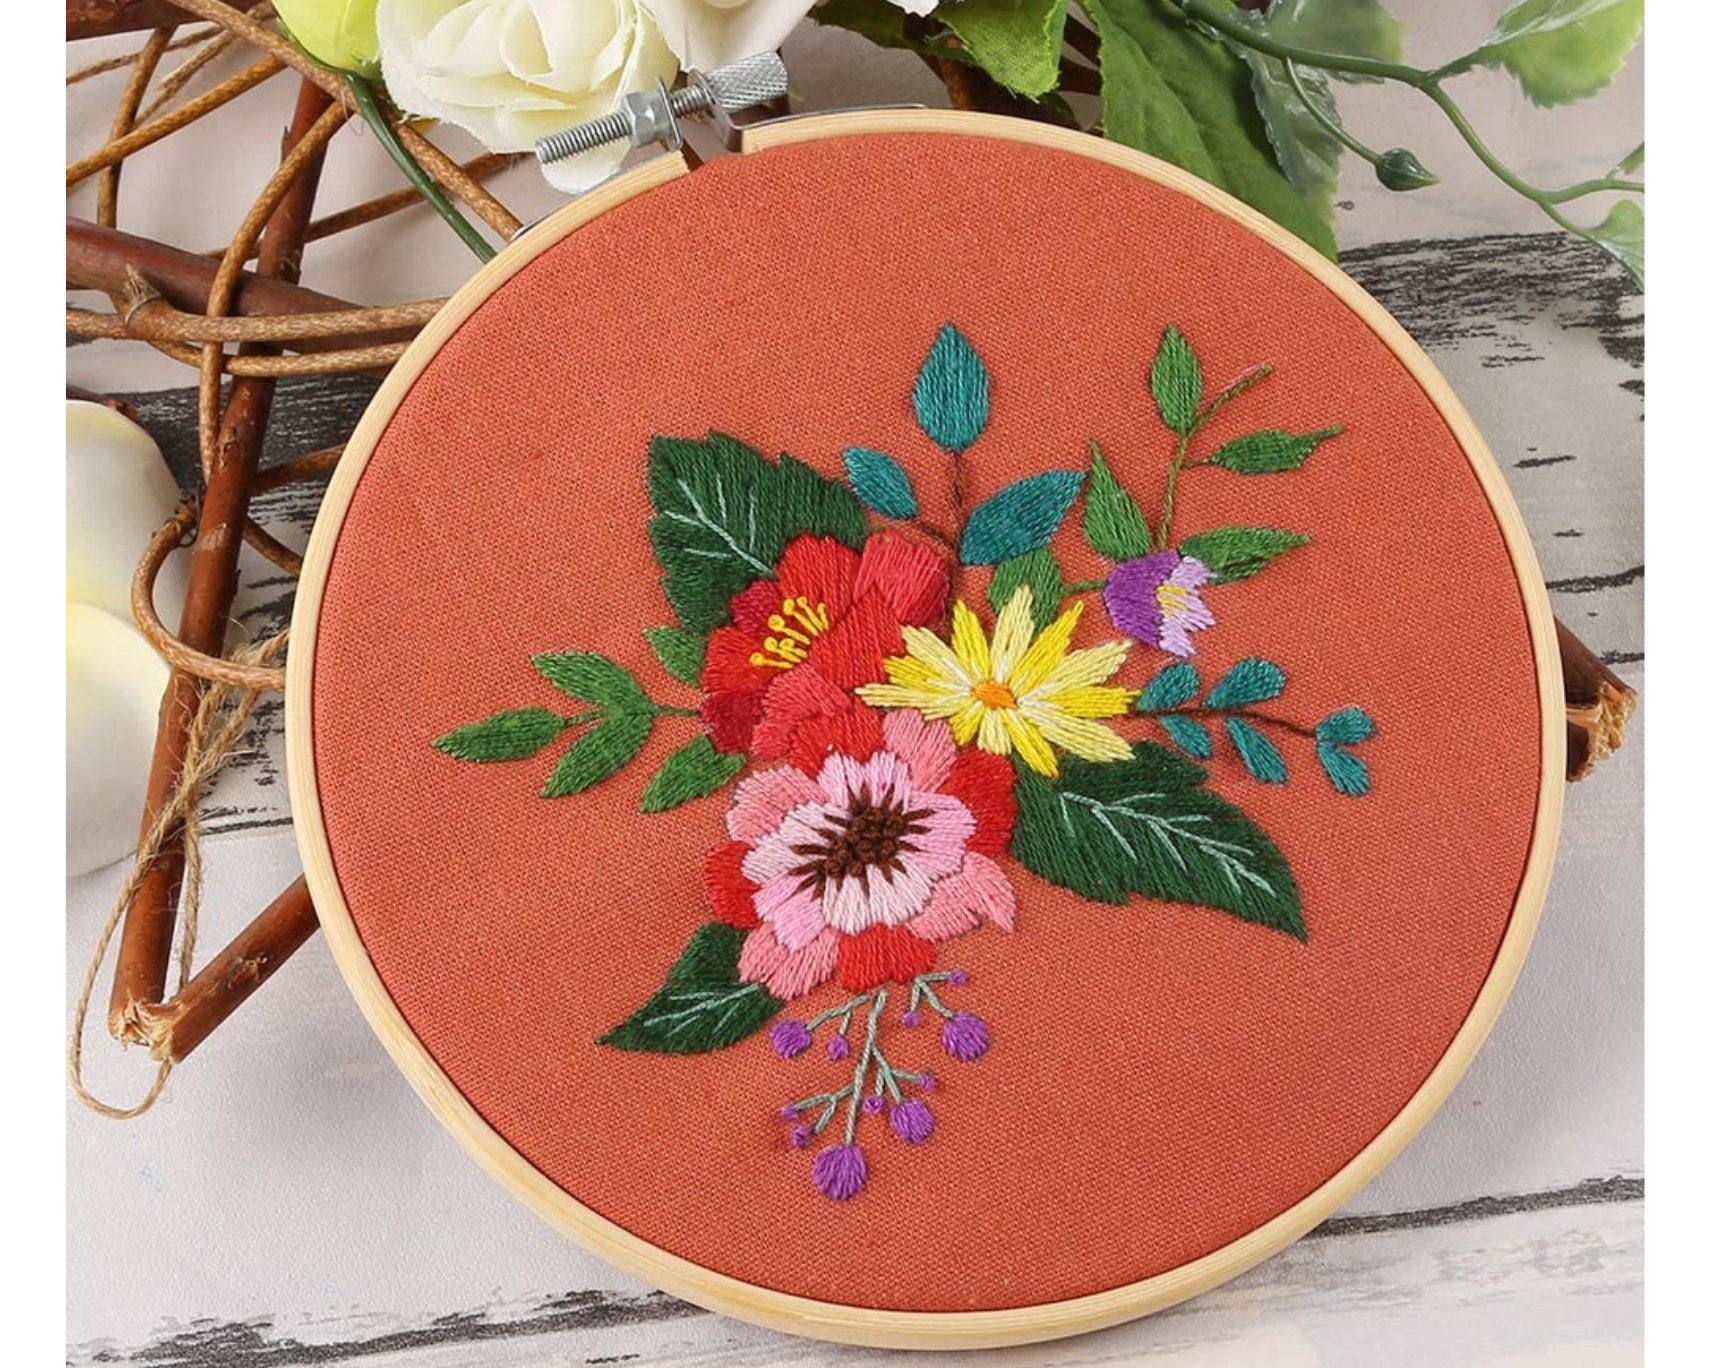 Beginner Embroidery Kits for Adults Flowers and Succulents Embroidery Kit  DIY Hand Embroidery Full Kit Cross Stitch Set 